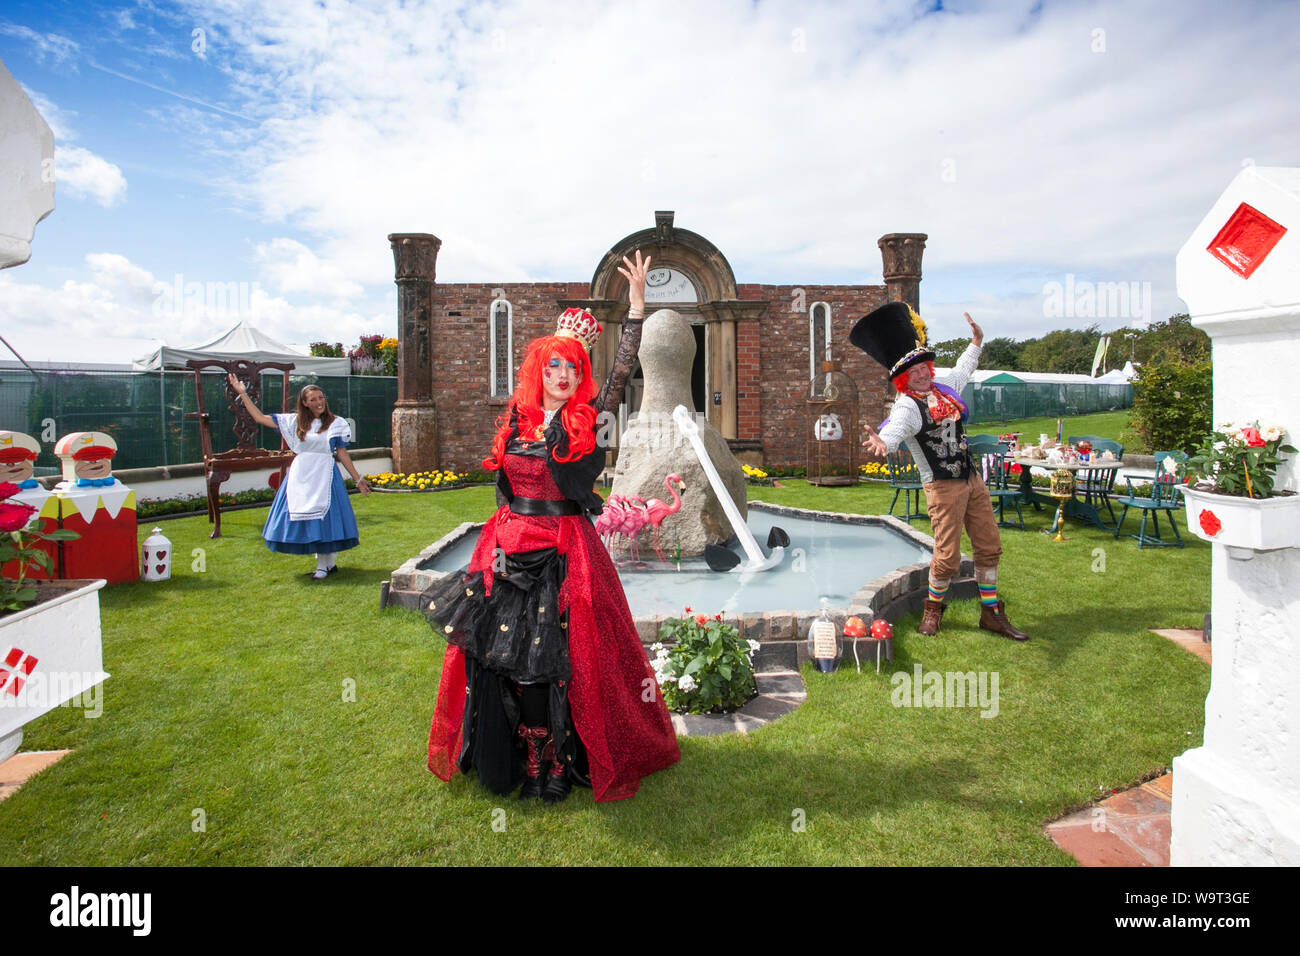 Southport, Merseyside, 15th August 2019.  Let the craziness begin as the Mad Hatters bring chaos and fun to the Flower Show in Southport, Merseyside.  The costumed performers welcomed visitors to the seaside event as it celebrates its 90th anniversary this week with a giant tea party.  Credit: Cernan Elias/Alamy Live News Stock Photo